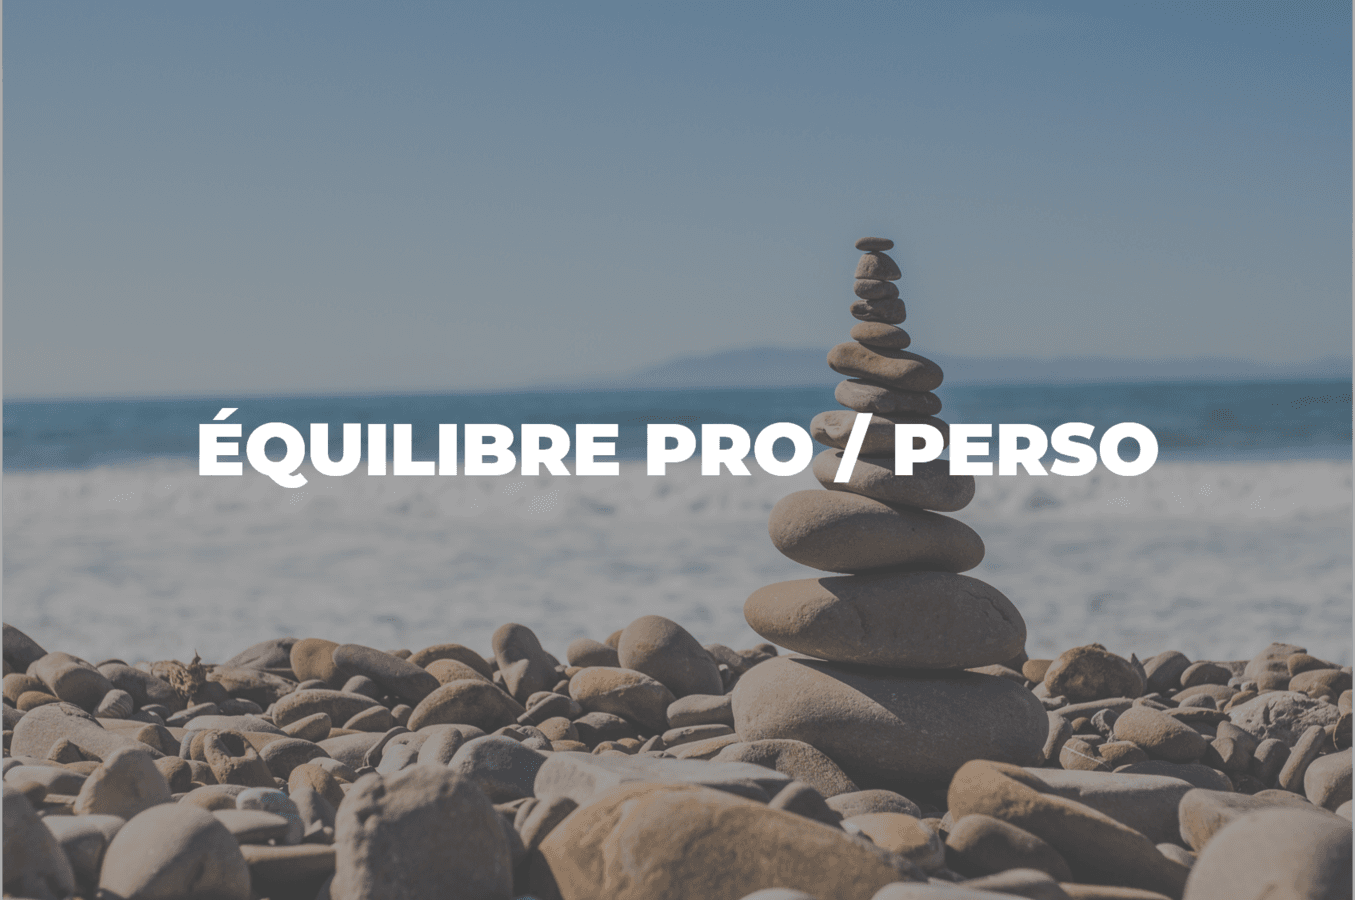 Equilibre pro / perso